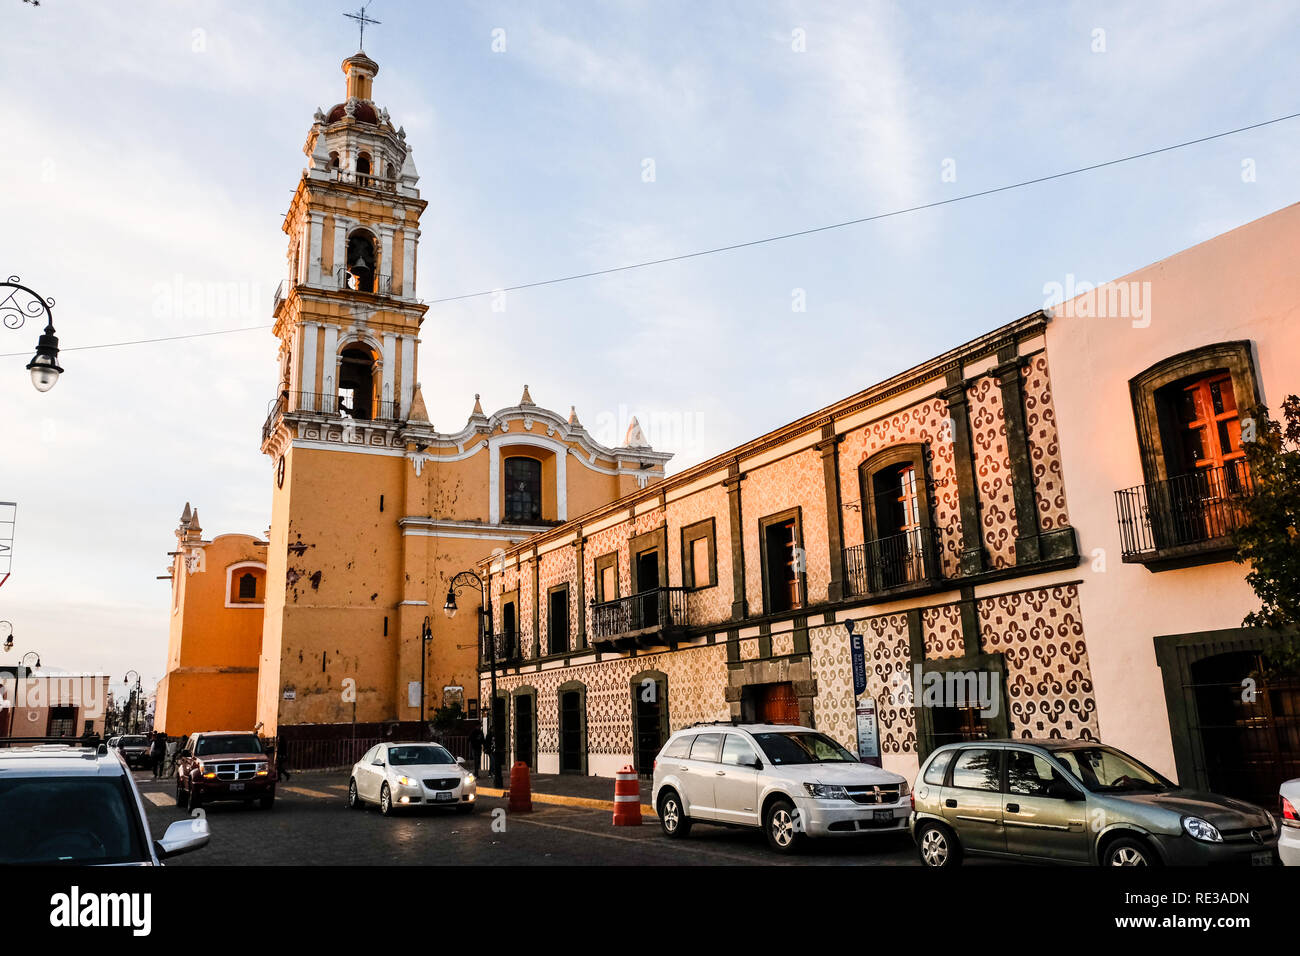 A yellow color single bell tower church in Cholula Puebla, Mexico Stock Photo